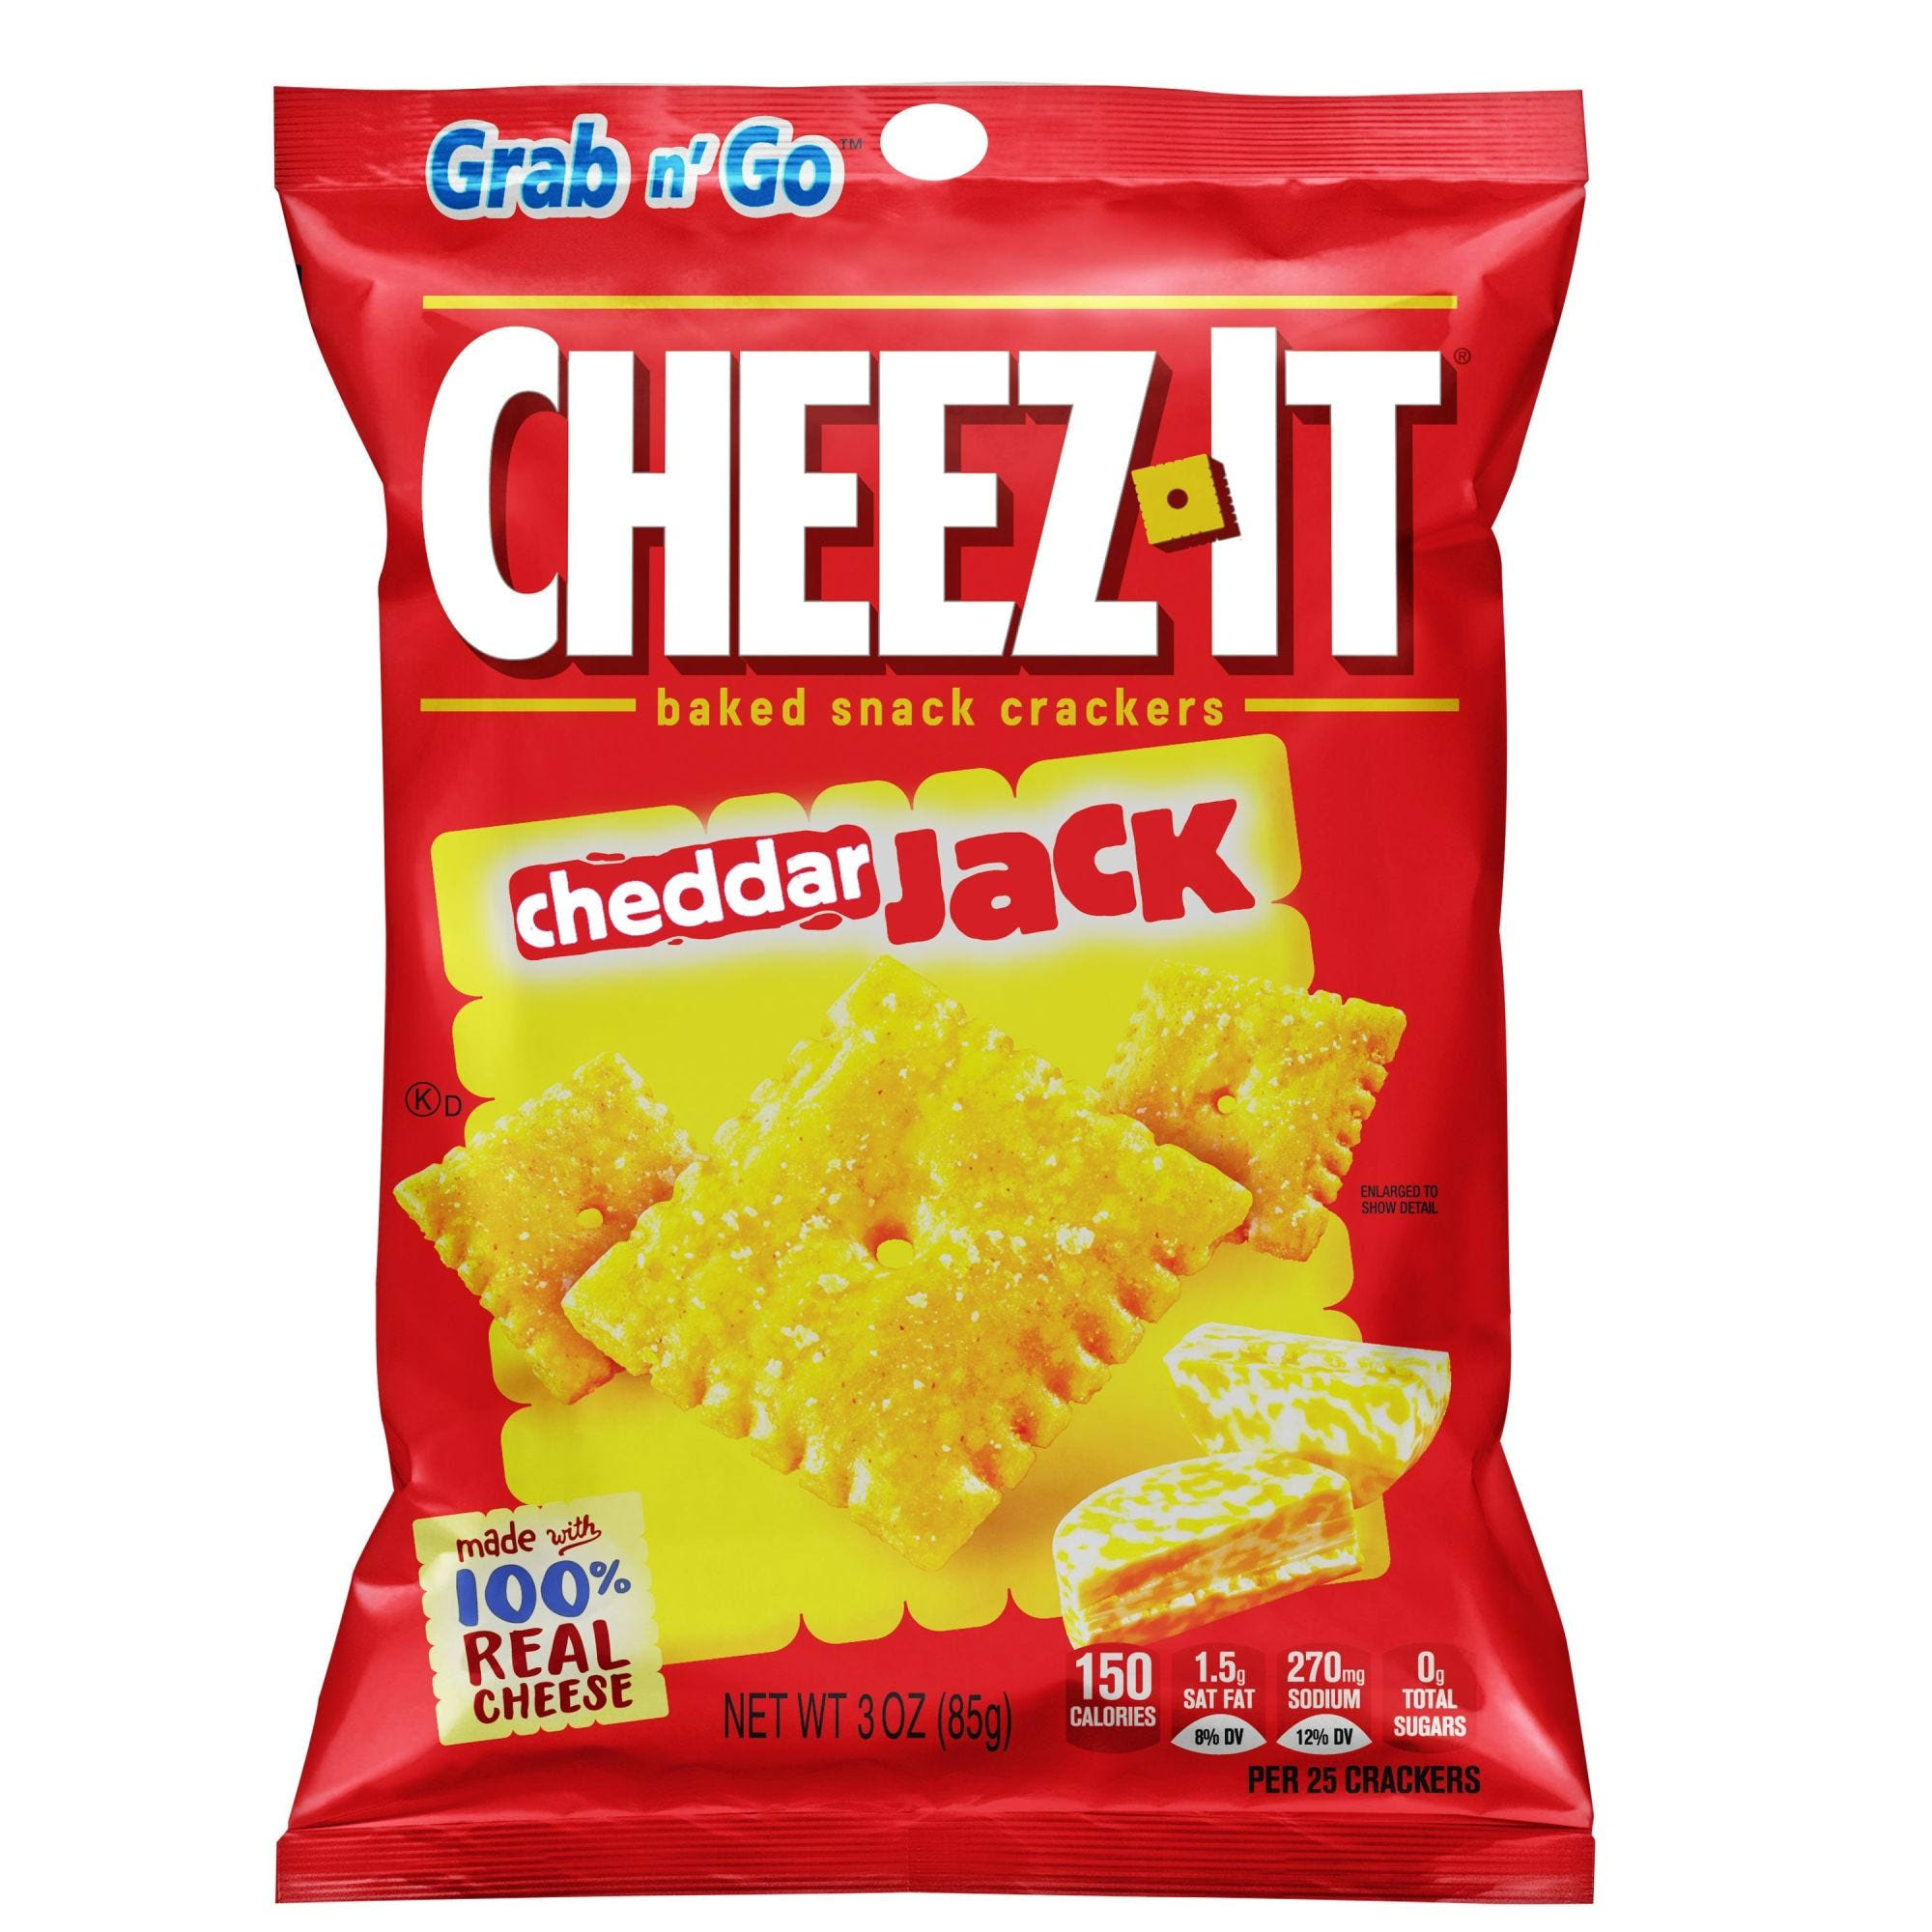 Cheez-It Baked Snack Crackers - Cheddar Jack, 3oz